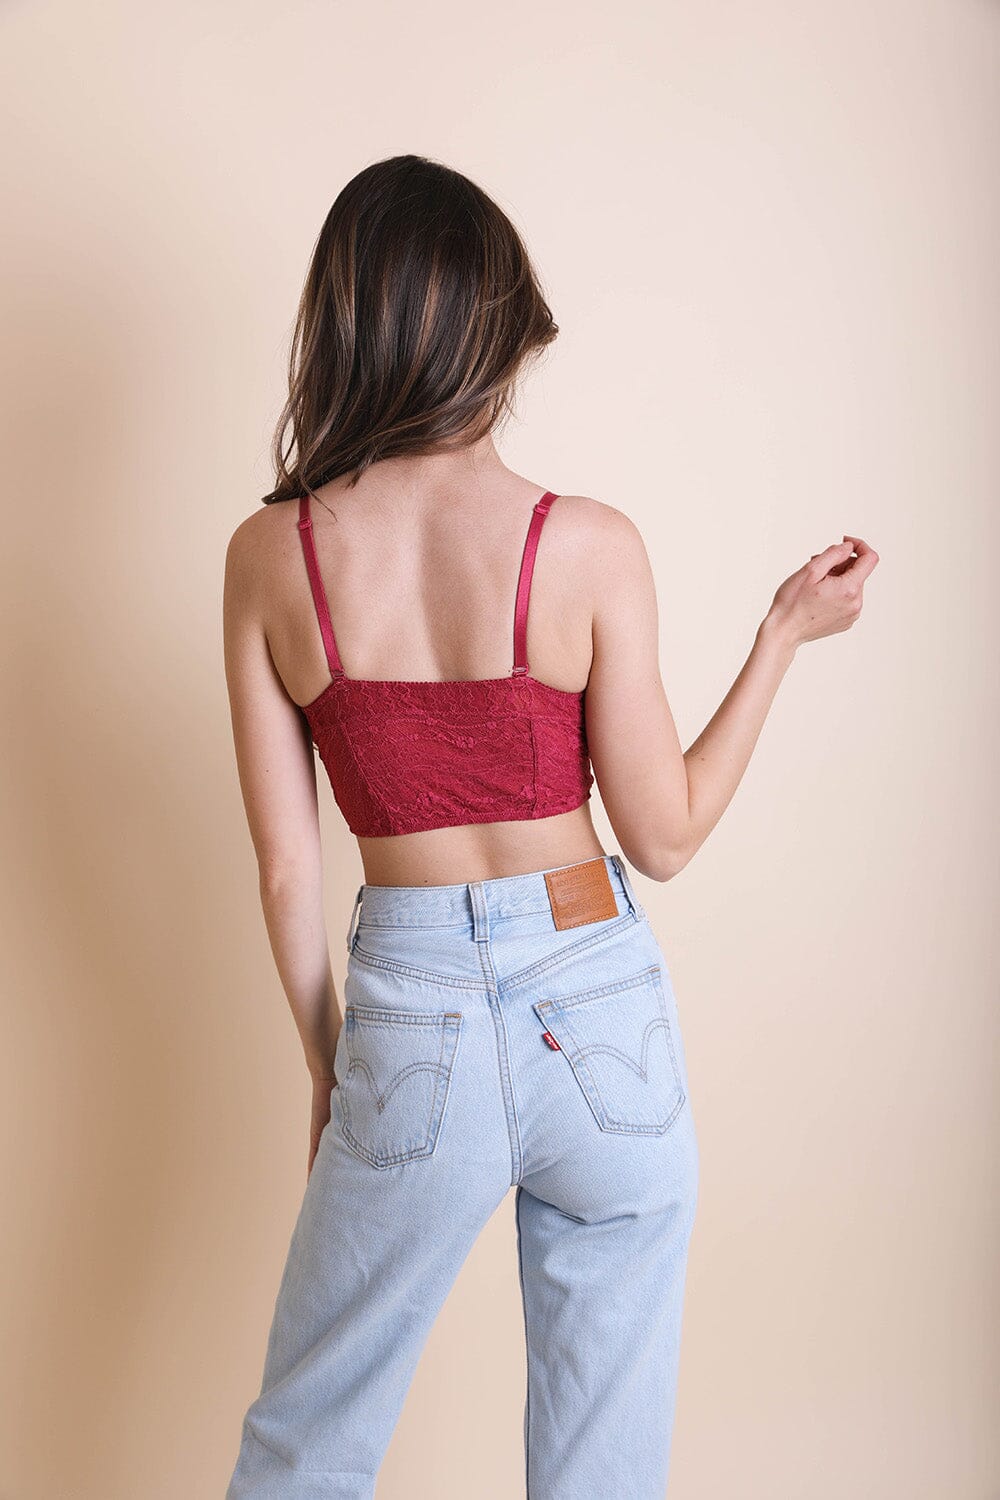 Cropped Lace Camisole Bralette Leto Collection XS/S Marsala 